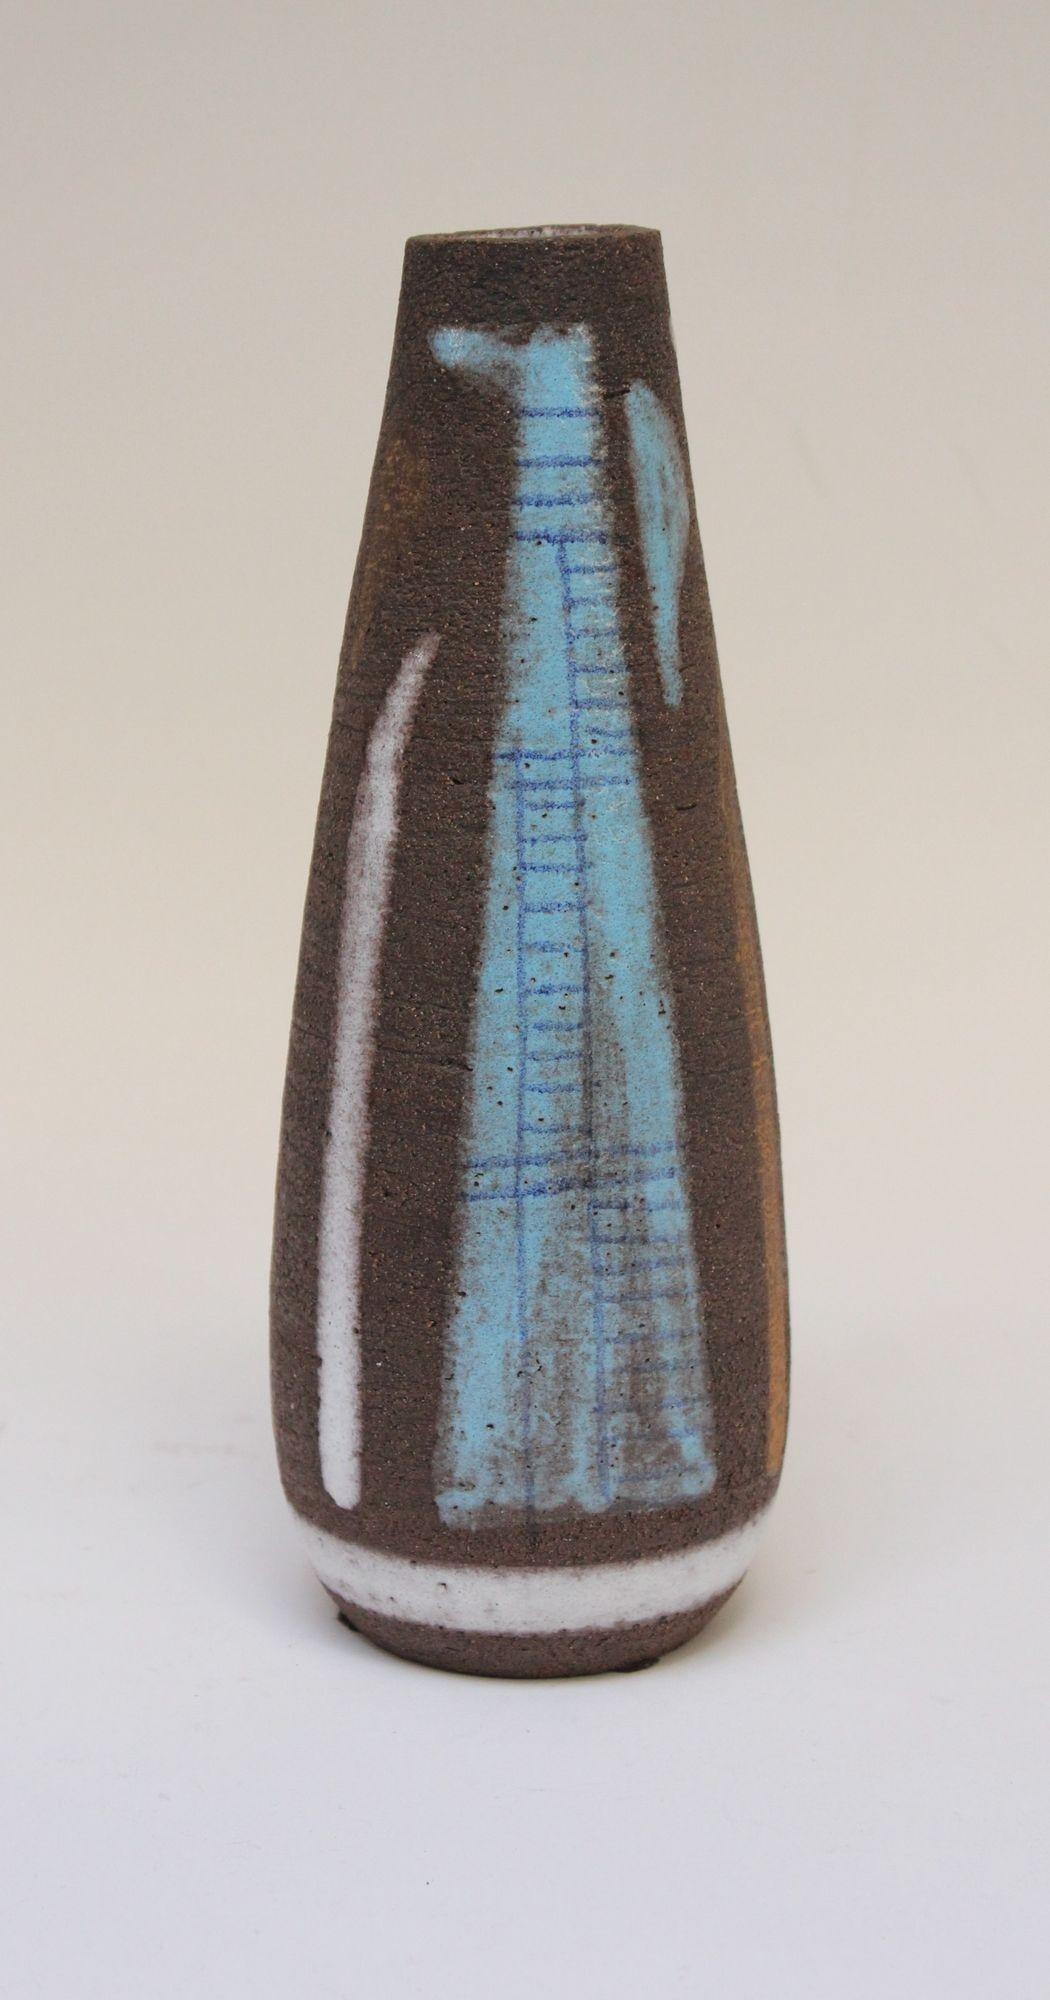 Attractive vase with abstract decoration in sky blue, brown, burnt orange, and white with linear decoration throughout (ca. 1960s, Italy).
Nice contrast between the smoothness of the blue and white glazes against the crudeness of the